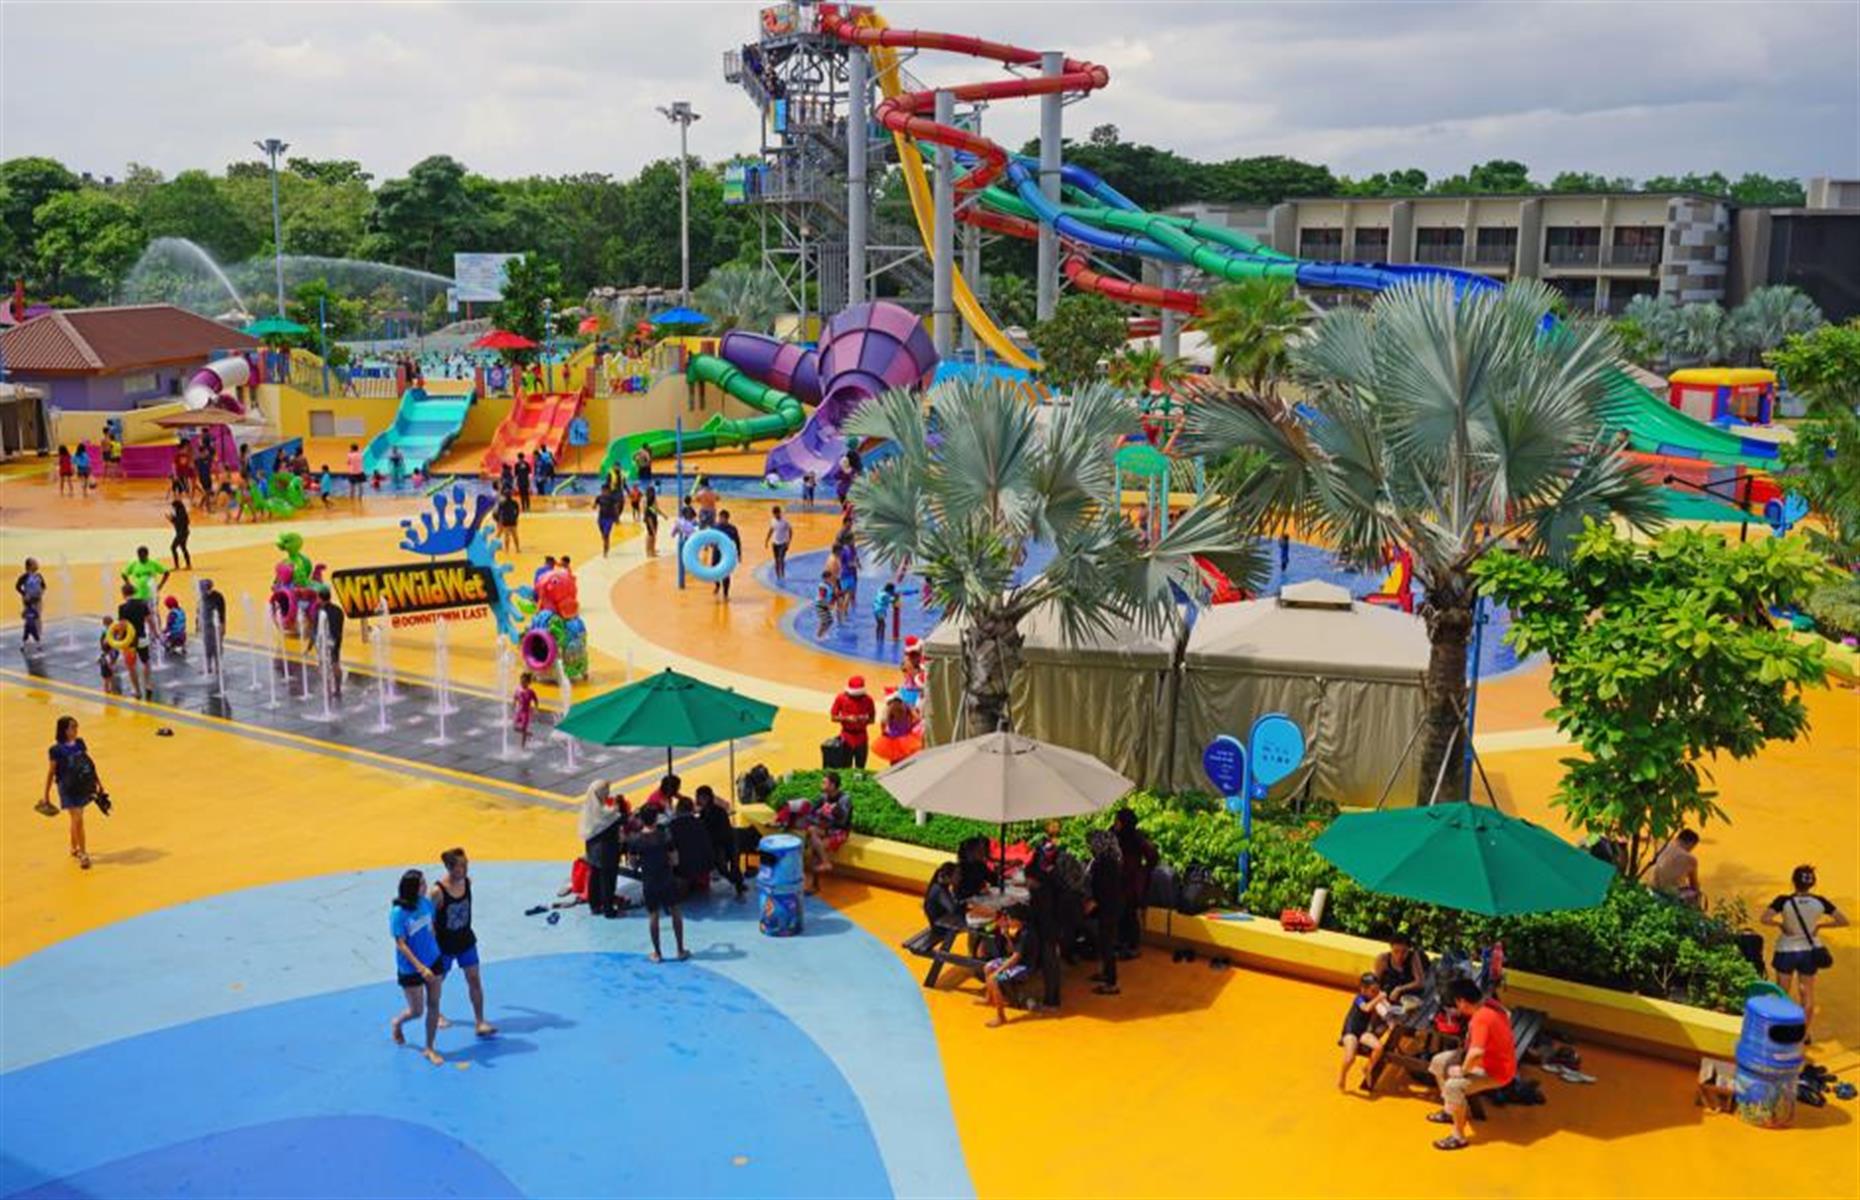 <p>With eight adrenaline-fuelled rides and three play areas (complete with big buckets for regular drenchings and sedate slides), <a href="https://www.wildwildwet.com/index.php">this water park</a> caters for most tastes. Highlights for thrill-seekers are careering up and down a giant U-shaped half-pipe on Slide Up, falling from four stories up on a 360-degree loop. Feeling competitive? Go head-to-head with friends as you charge down the multi-lane slide Kraken Racers.</p>  <p><a href="http://www.loveexploring.com/guides/83823/explore-singapore-the-top-things-to-do-where-to-stay-and-what-to-eat"><strong>Discover our guide to exploring Singapore here</strong></a></p>